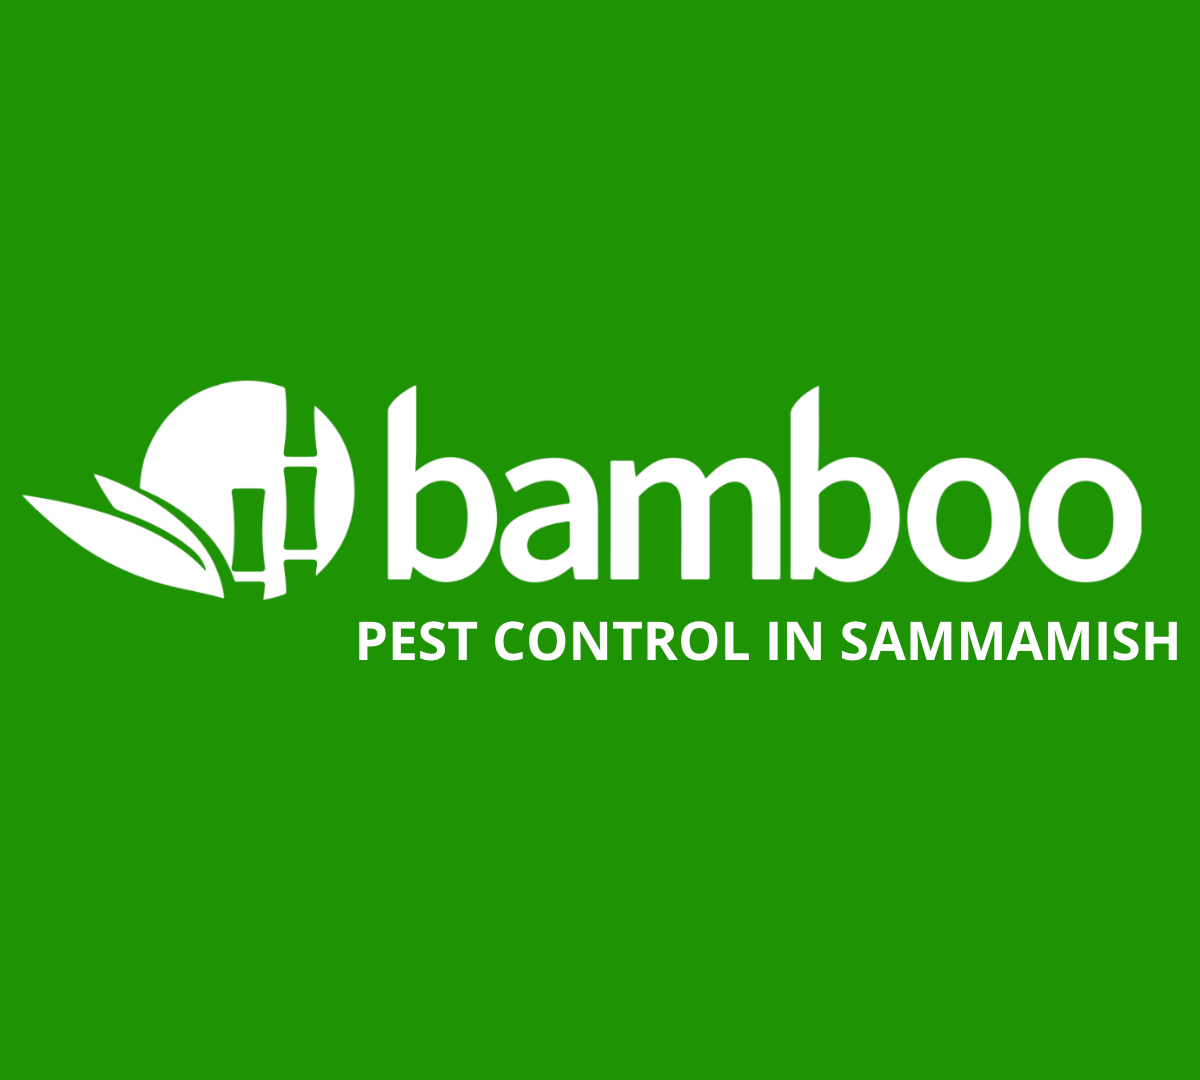 Sammamish Pest Control by Bamboo